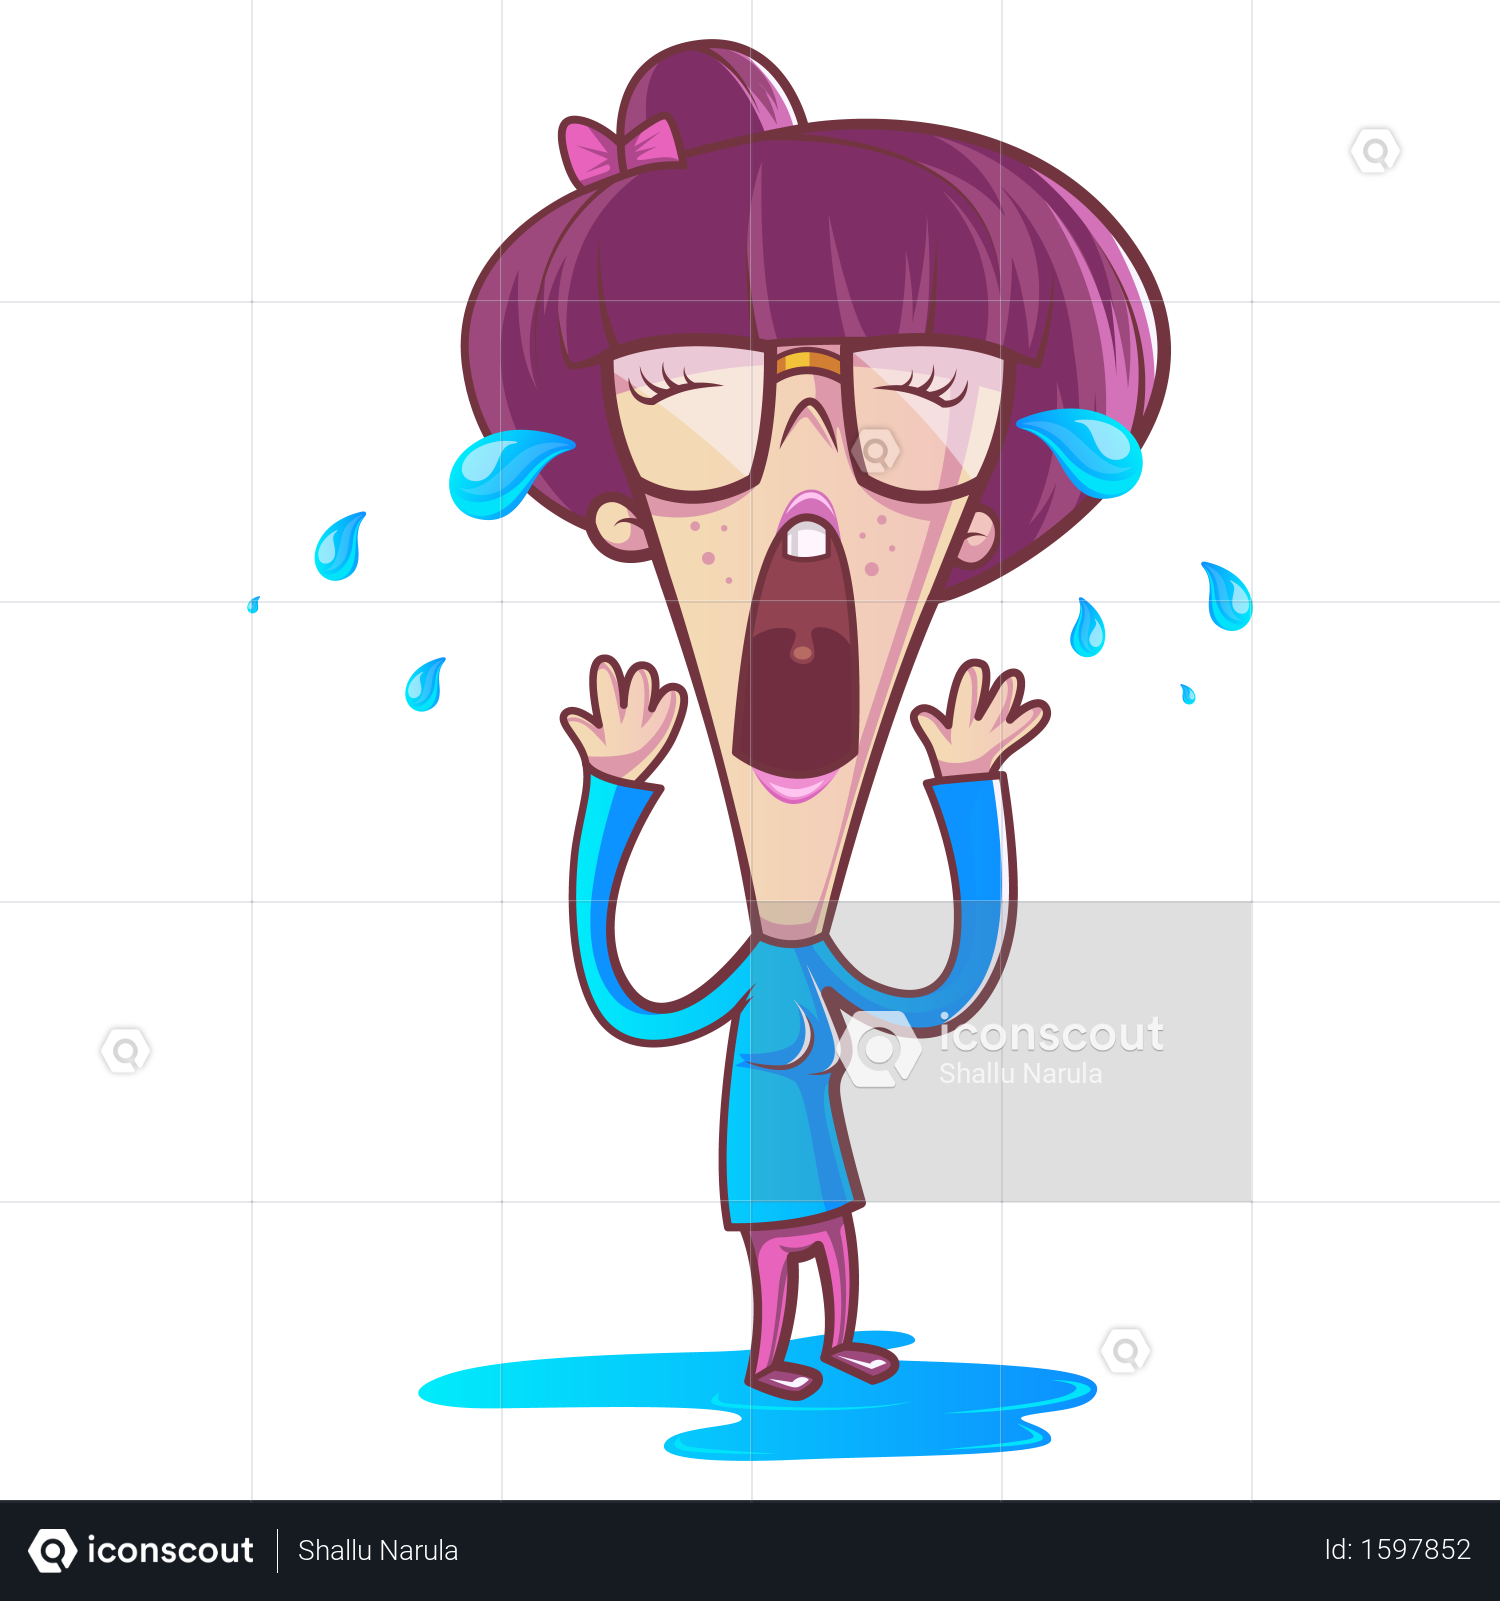 Download Premium Illustration of cute girl is crying Illustration ...